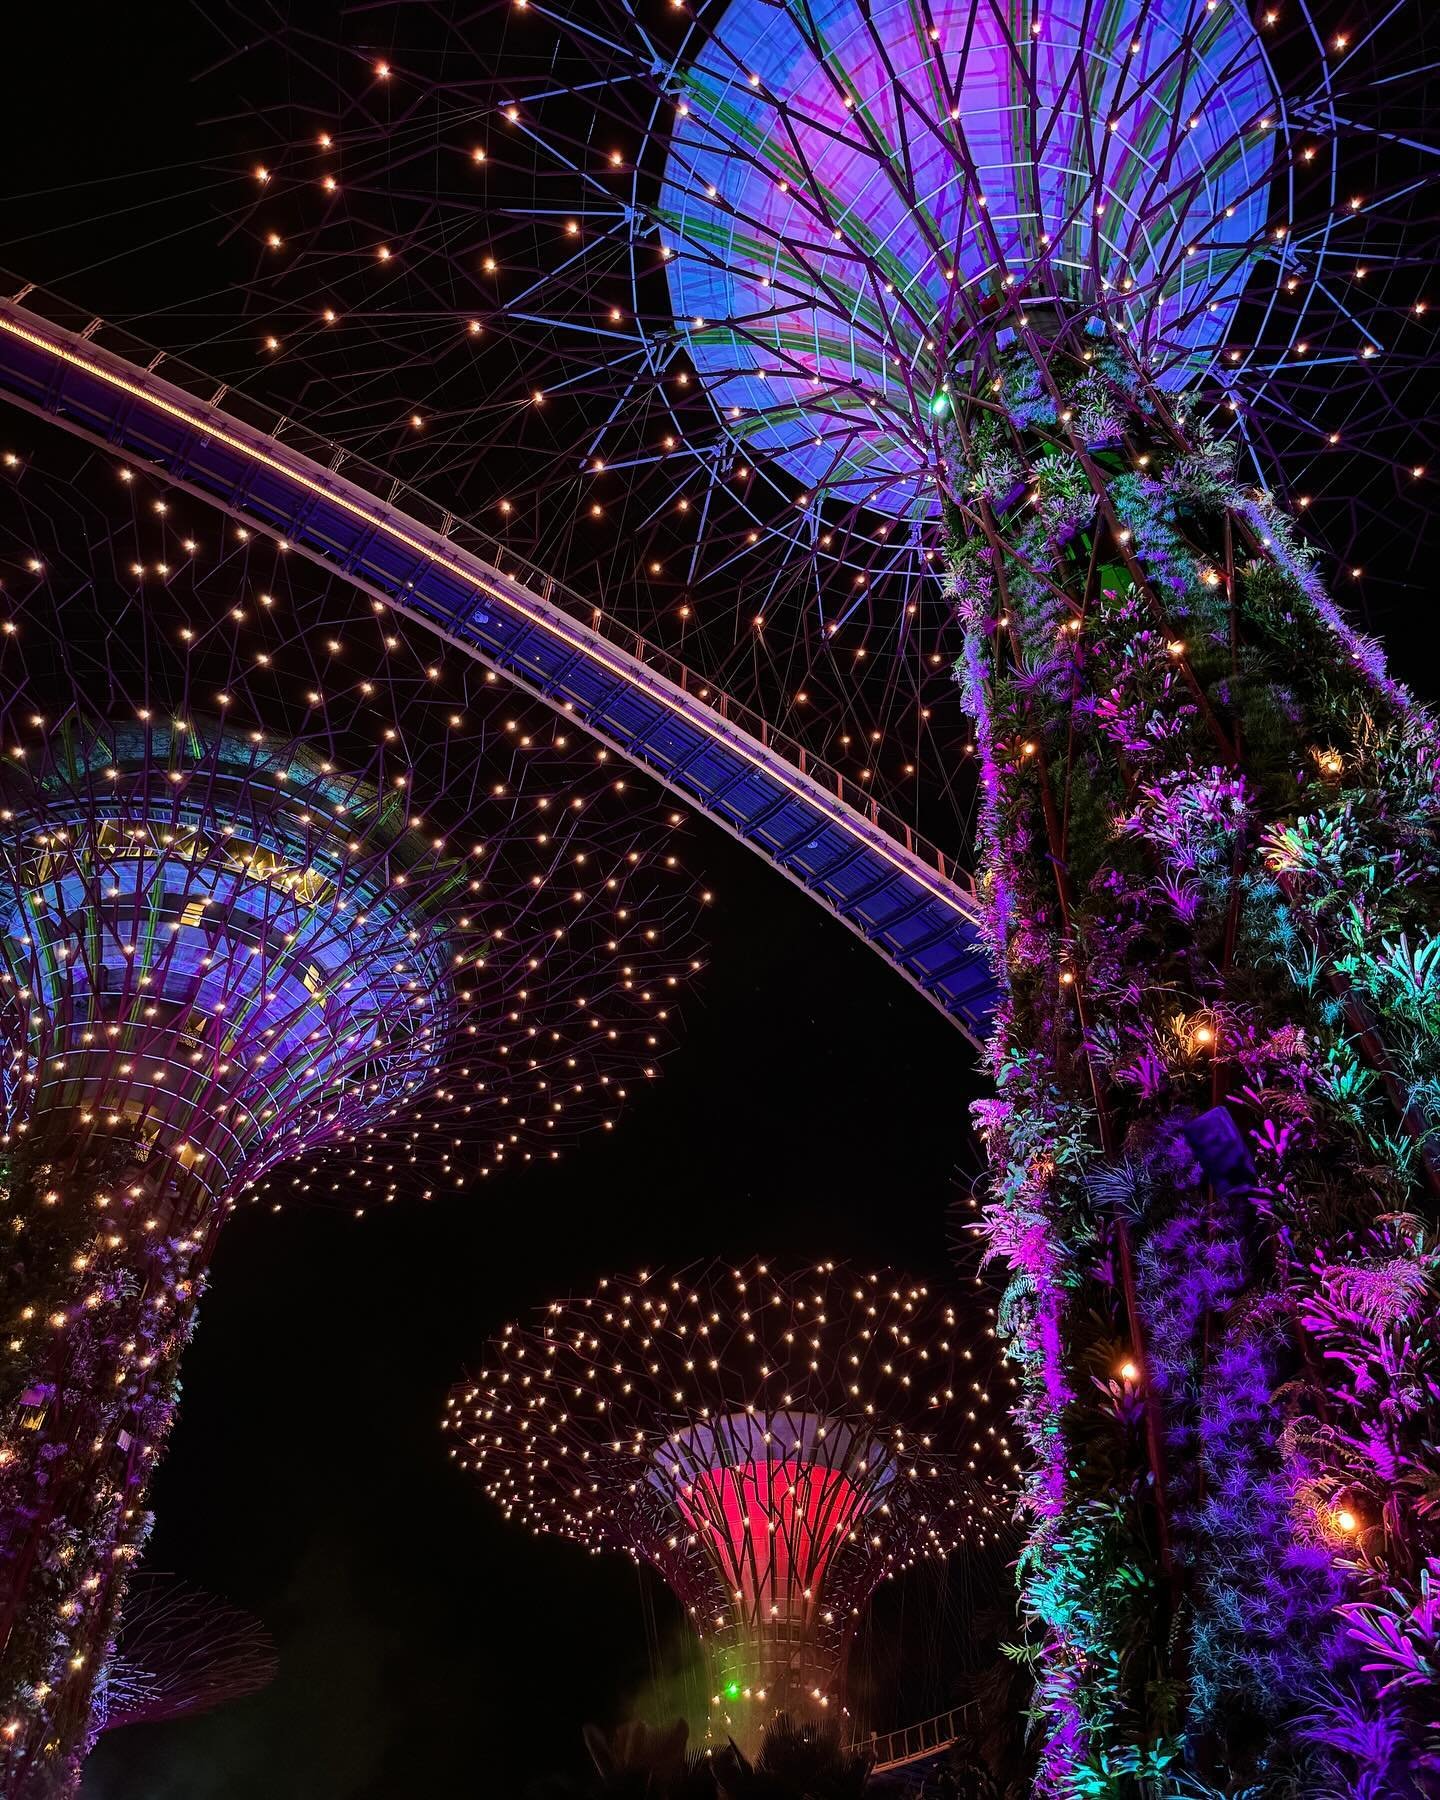 Gardens by the Bay (post 2), Singapore:  One of the things that stands out&hellip;literally&hellip;is the Gardens&rsquo; 18 Supertrees, 12 of which appear together in what is called the Supertree Grove. These supersized man-made &ldquo;trees&rdquo; w